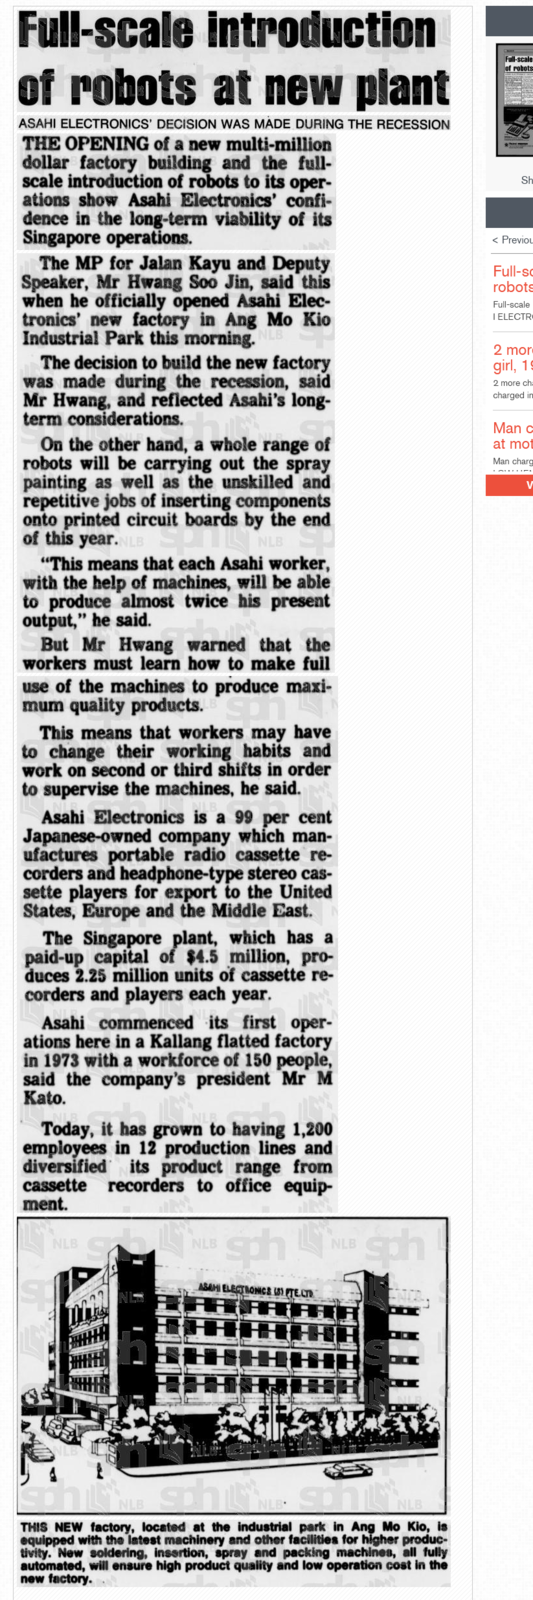 Full-scale introduction of robots at new plant Singapore Monitor 1984.png